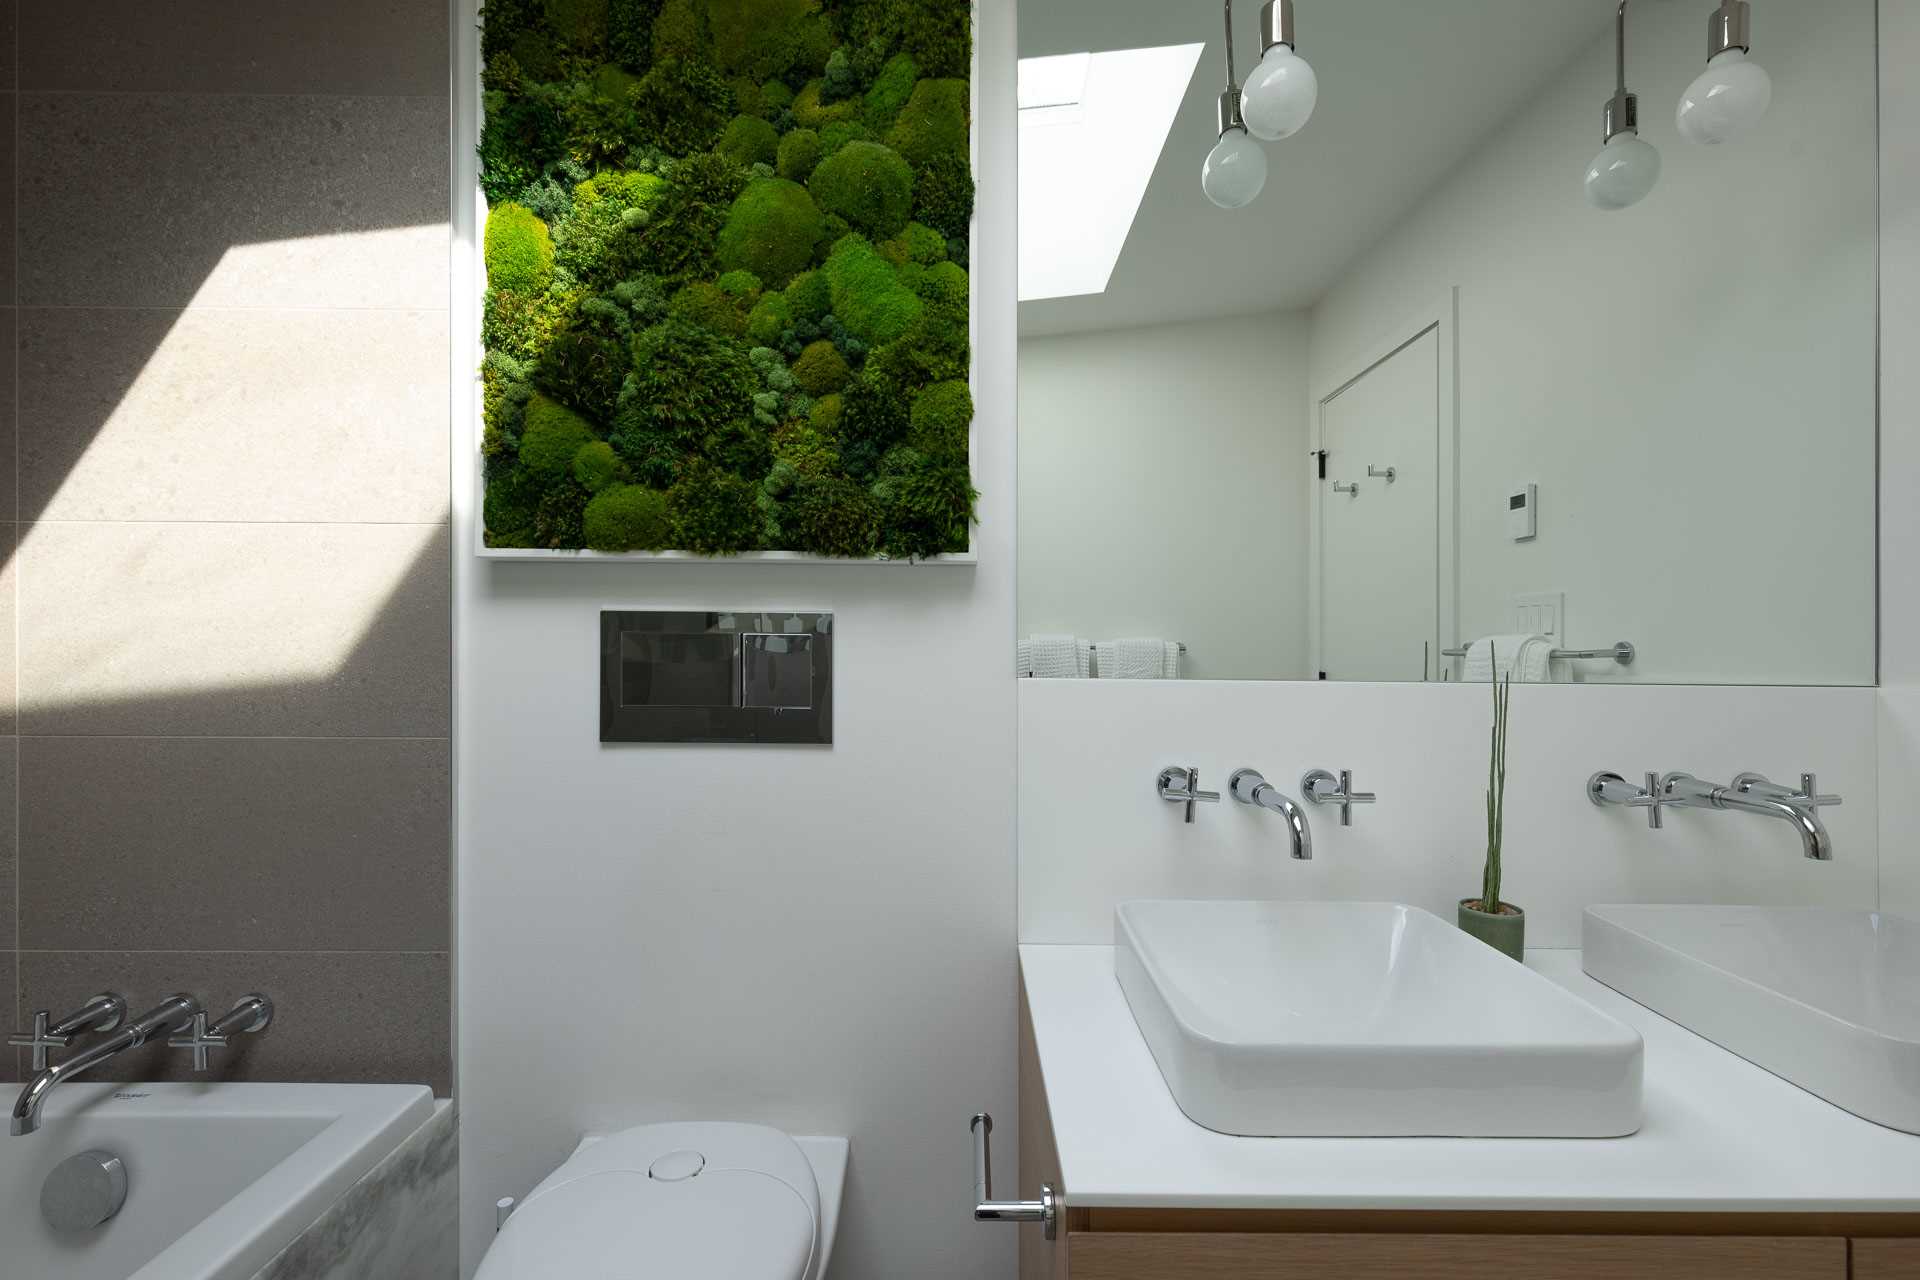 A modern bathroom with oversized tiles, and a simple white and wood vanity.